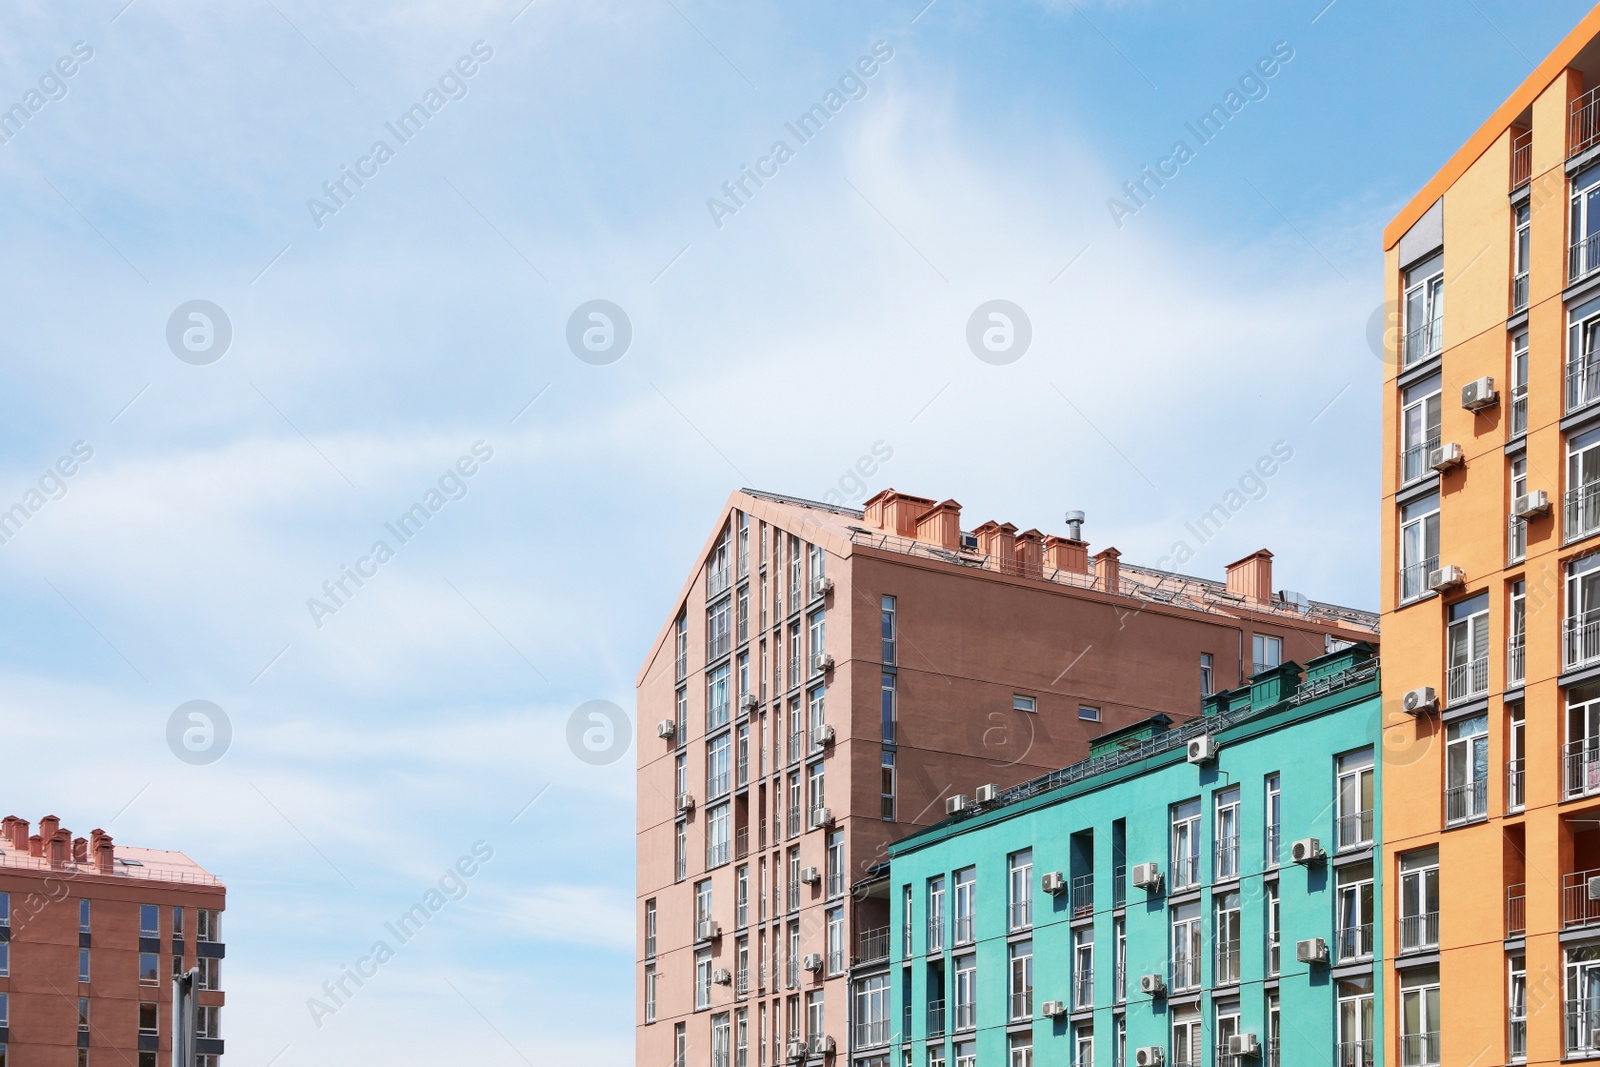 Photo of Colorful modern buildings with windows against sky. Urban architecture